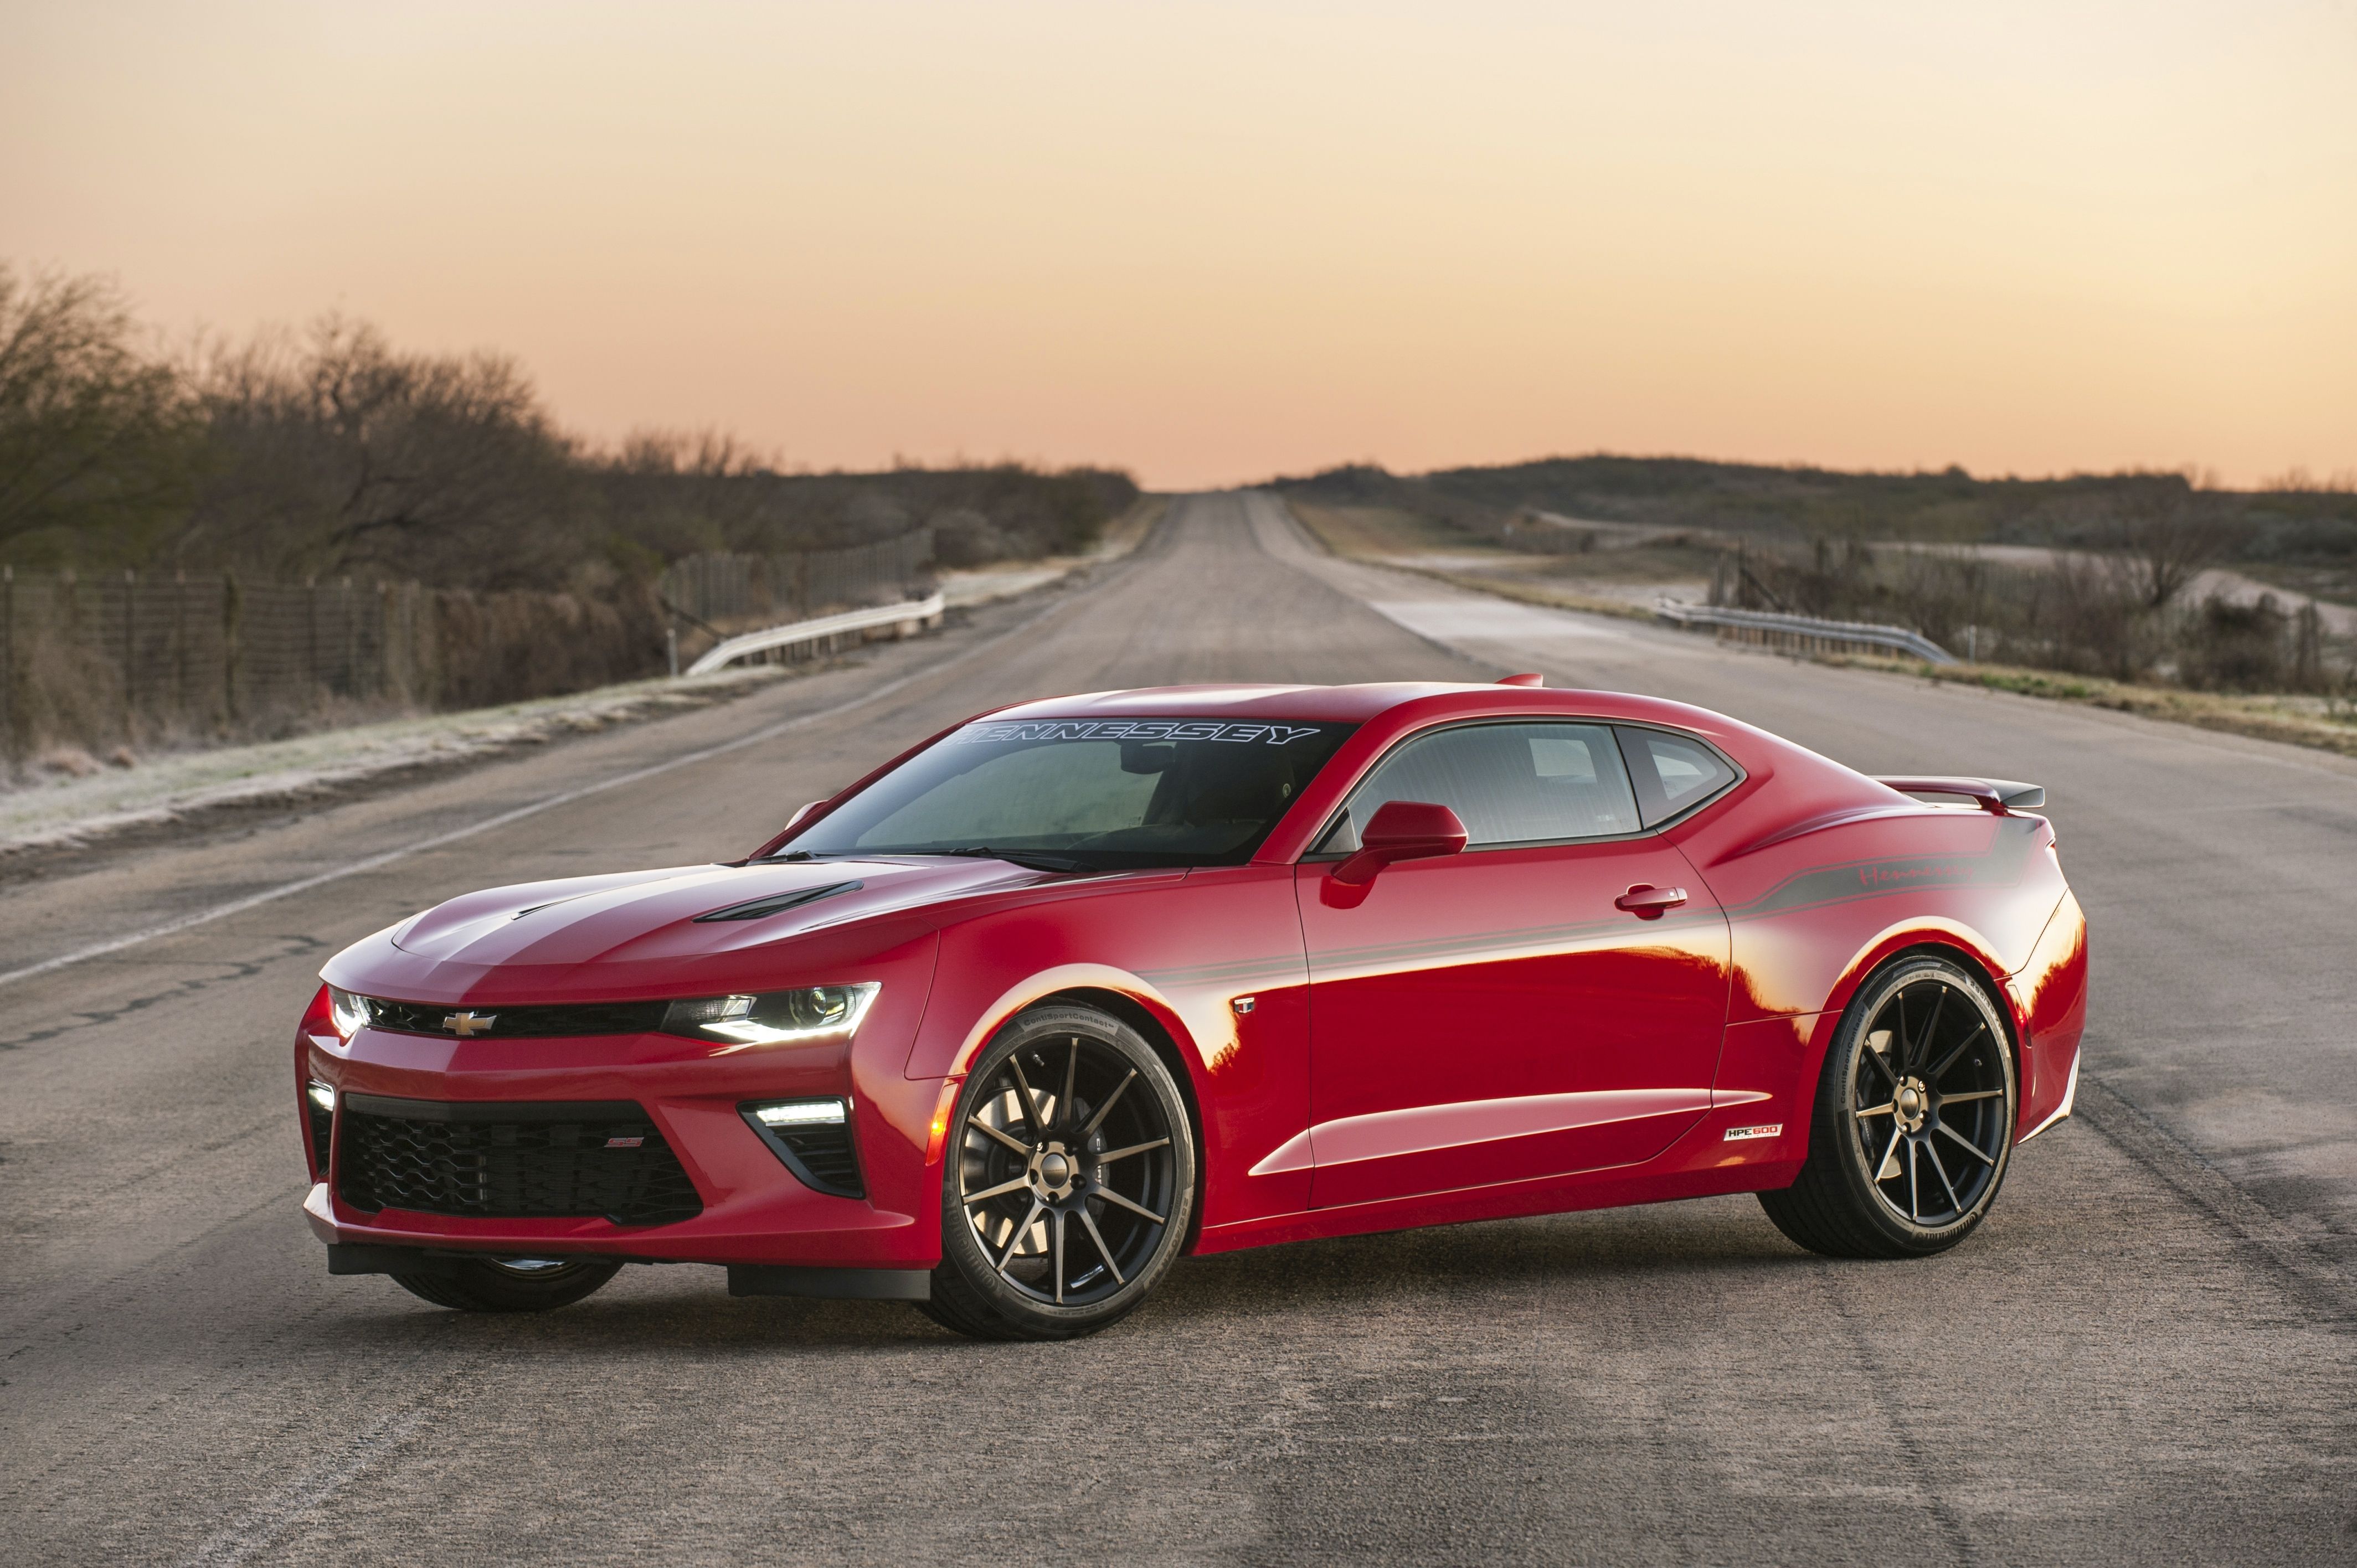 The 2019 Camaro Ss Release Date, Price and Review